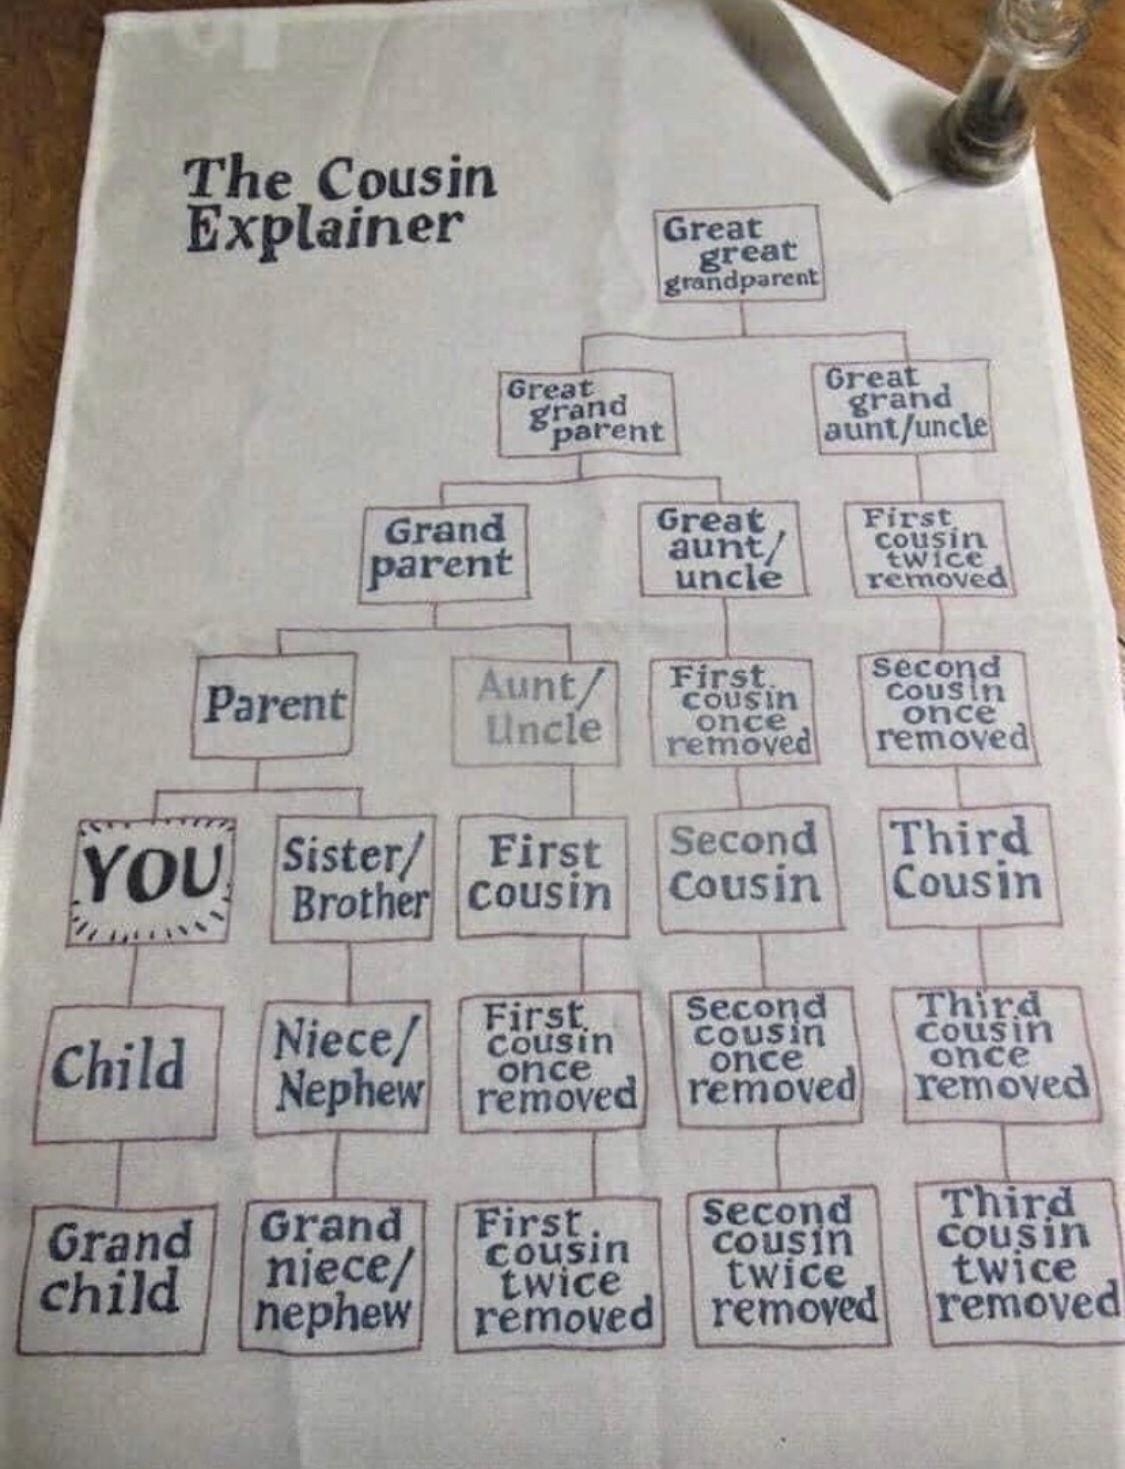 a tea towel that shows a family tree from great grand parent down to grand child with all the levels of cousins nieces, nephews, etc.